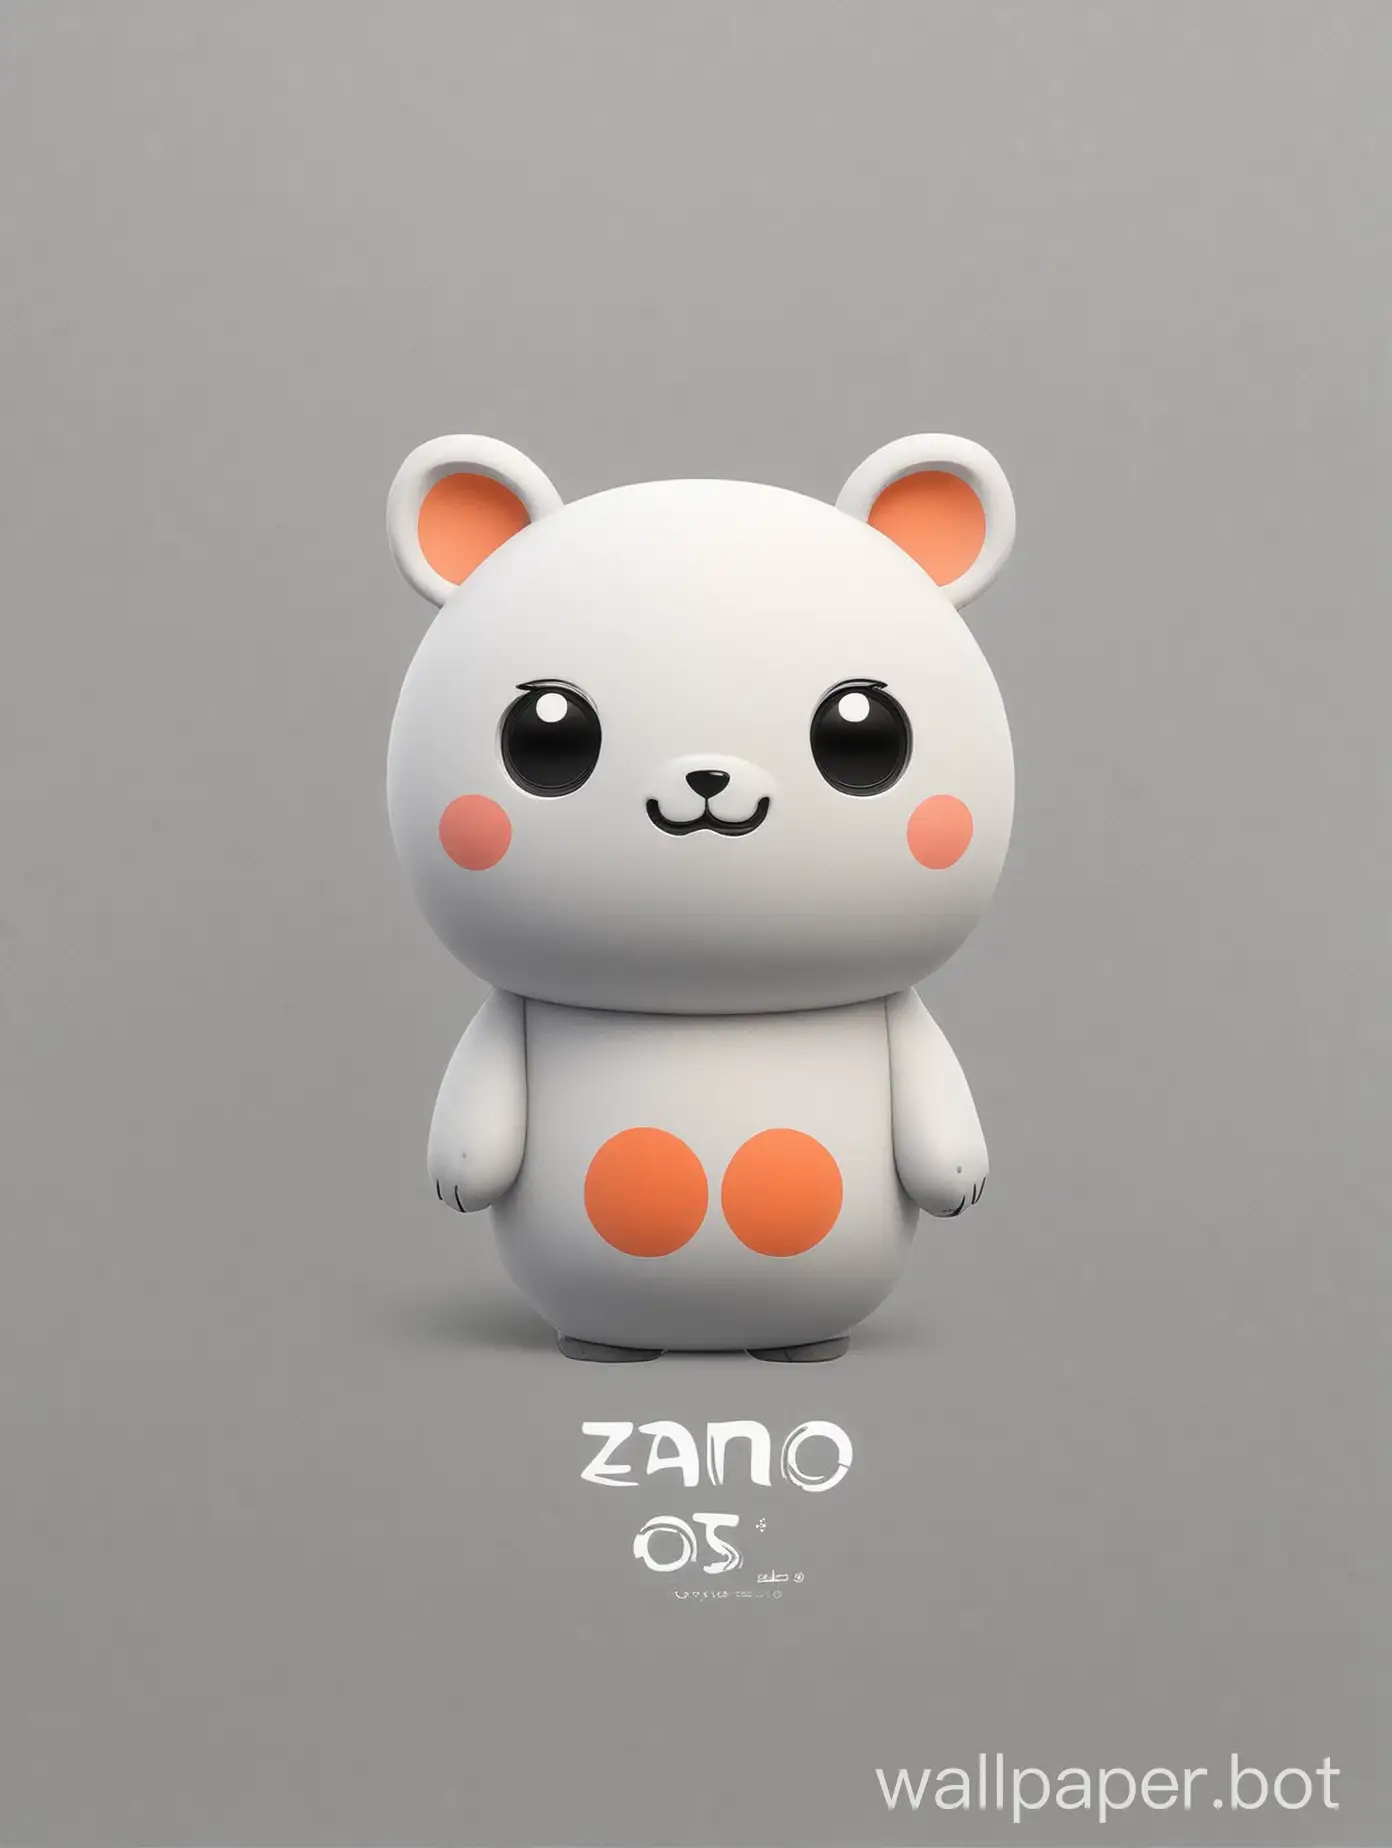  "Zano OS" simple minimal design, with a cute tech animal logo (the input is in English, so the output must be identical to the input)